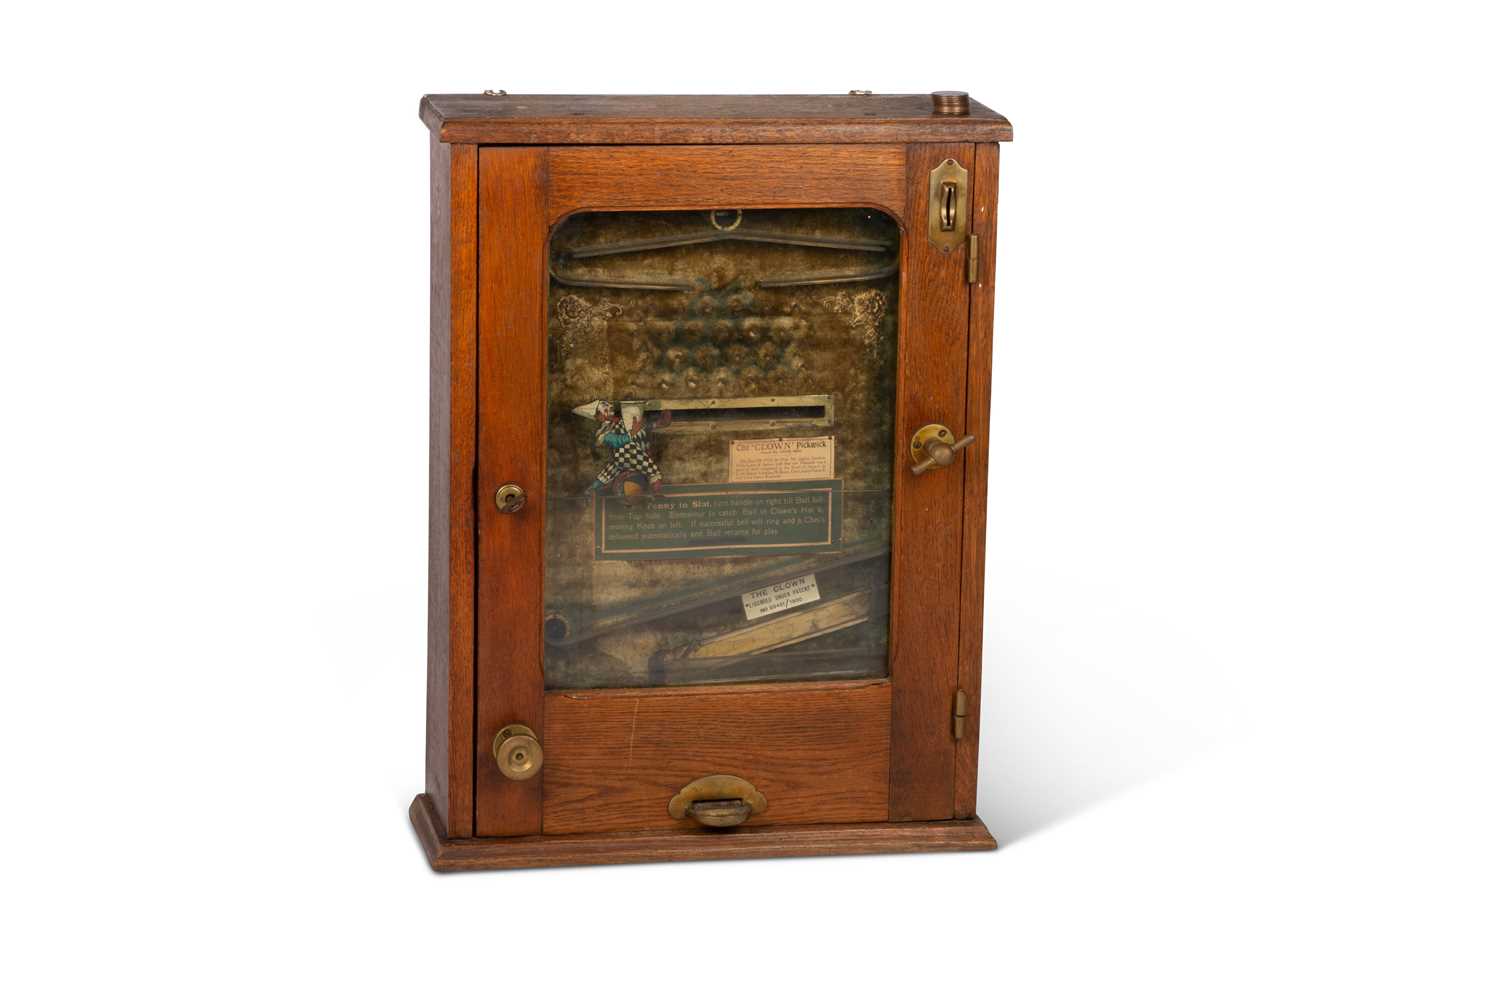 AN EARLY 20TH CENTURY OAK-CASED CATCHER-STYLE PENNY ARCADE MACHINE, THE 'CLOWN' PICKWICK